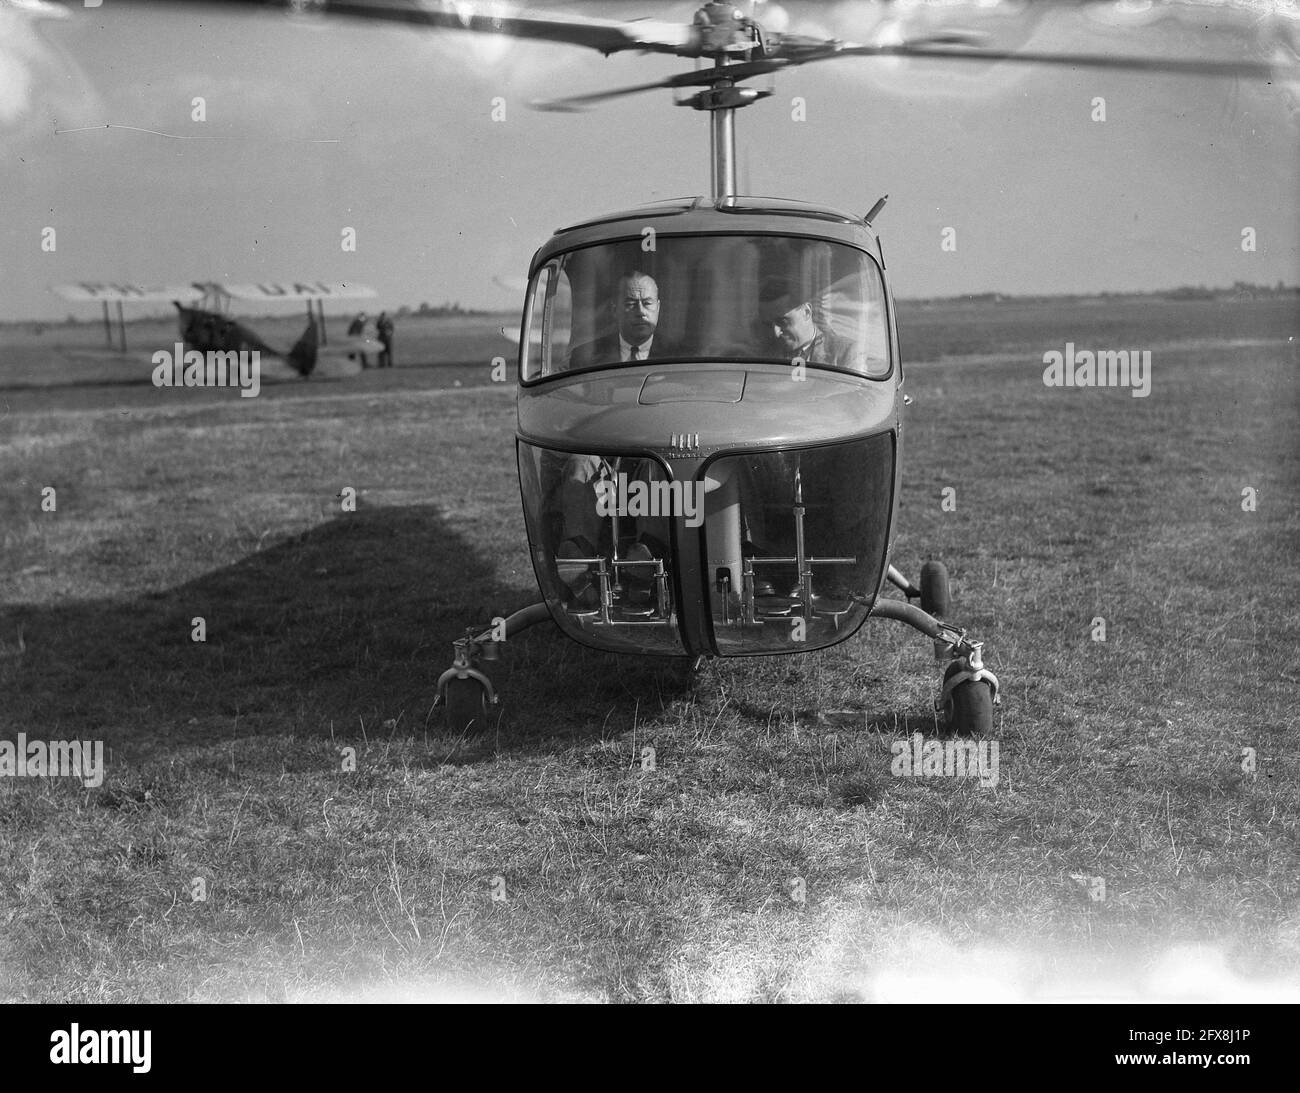 Bell Helicoptere, October 1, 1947, helicopters, The Netherlands, 20th century press agency photo, news to remember, documentary, historic photography 1945-1990, visual stories, human history of the Twentieth Century, capturing moments in time Stock Photo